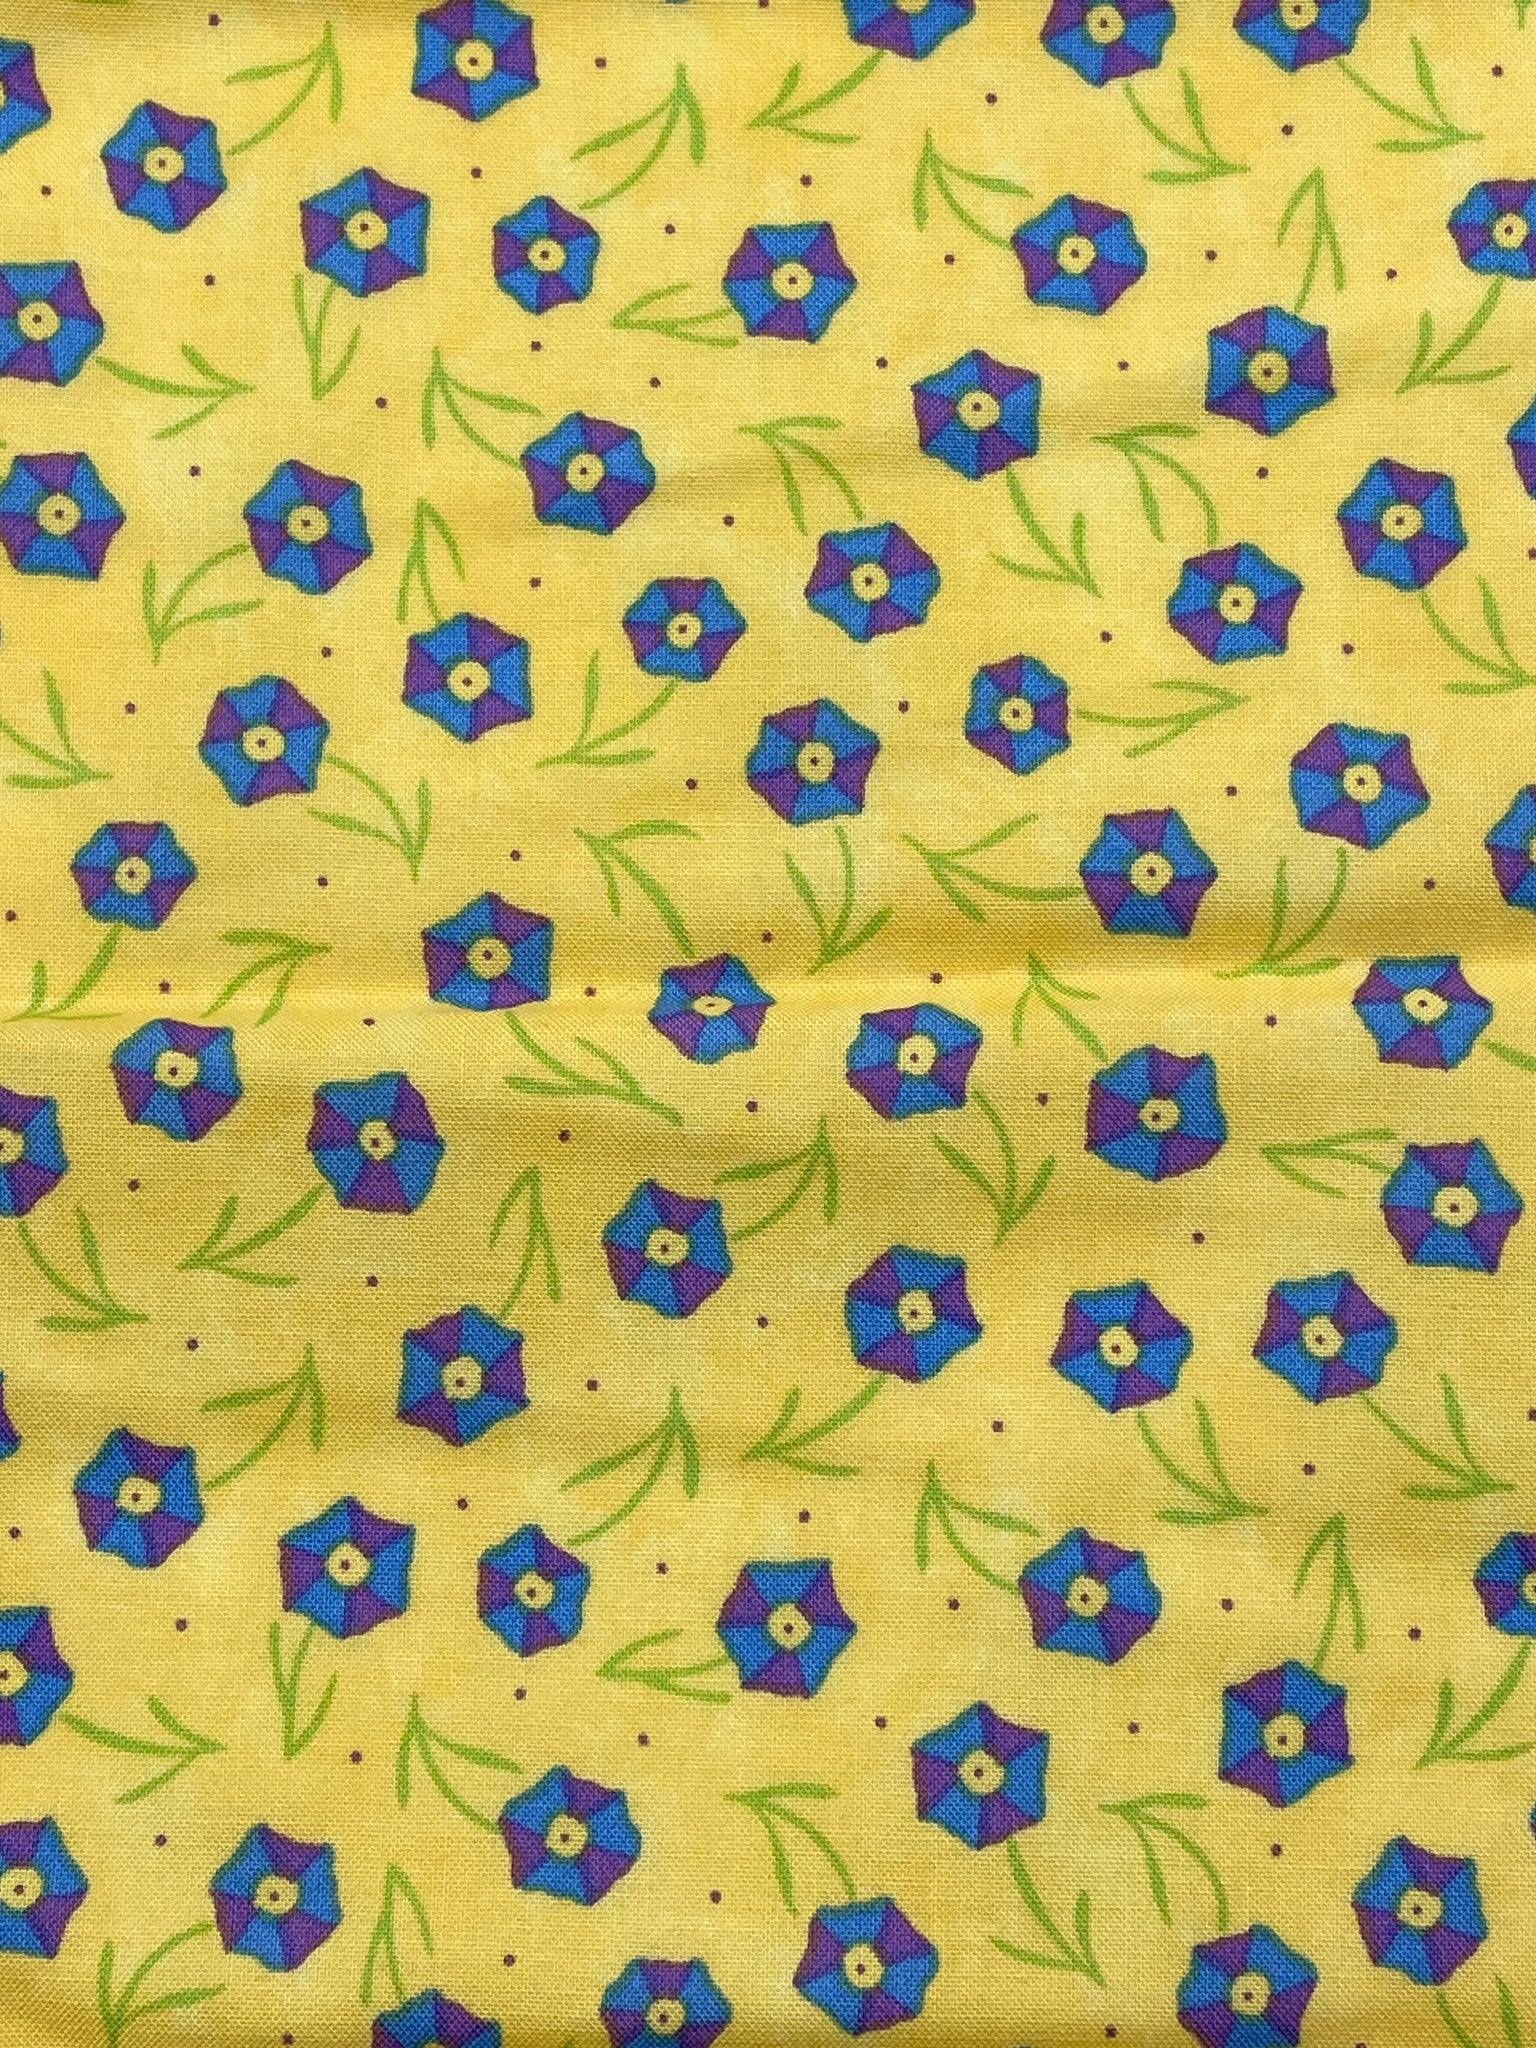 2 YD Quilting Cotton - Yellow with Morning Glory Flowers